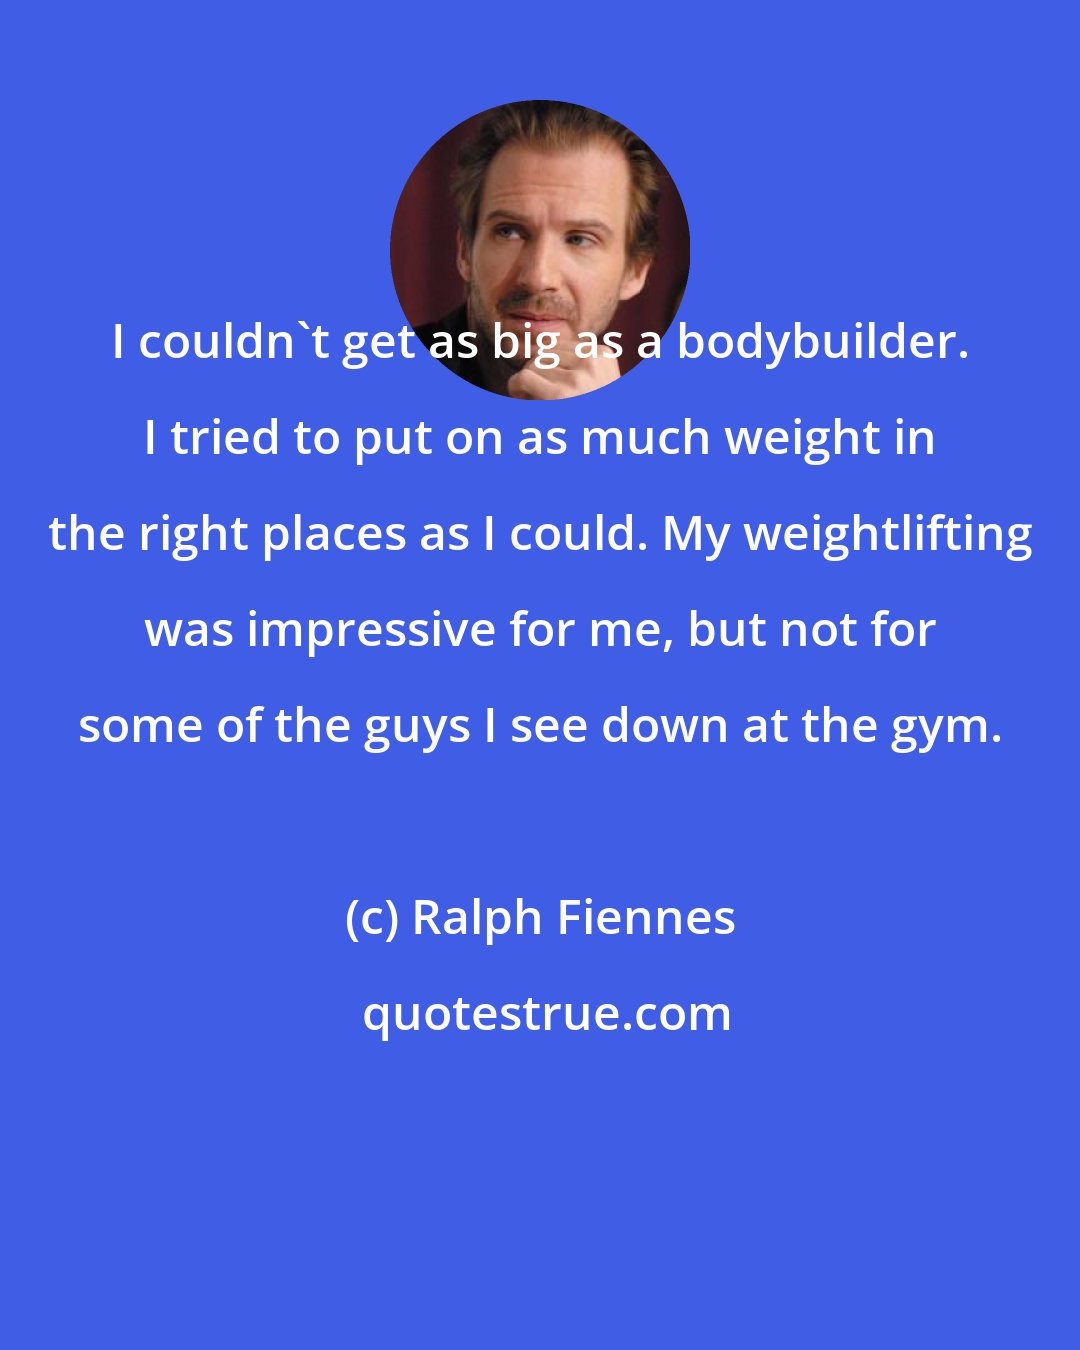 Ralph Fiennes: I couldn't get as big as a bodybuilder. I tried to put on as much weight in the right places as I could. My weightlifting was impressive for me, but not for some of the guys I see down at the gym.